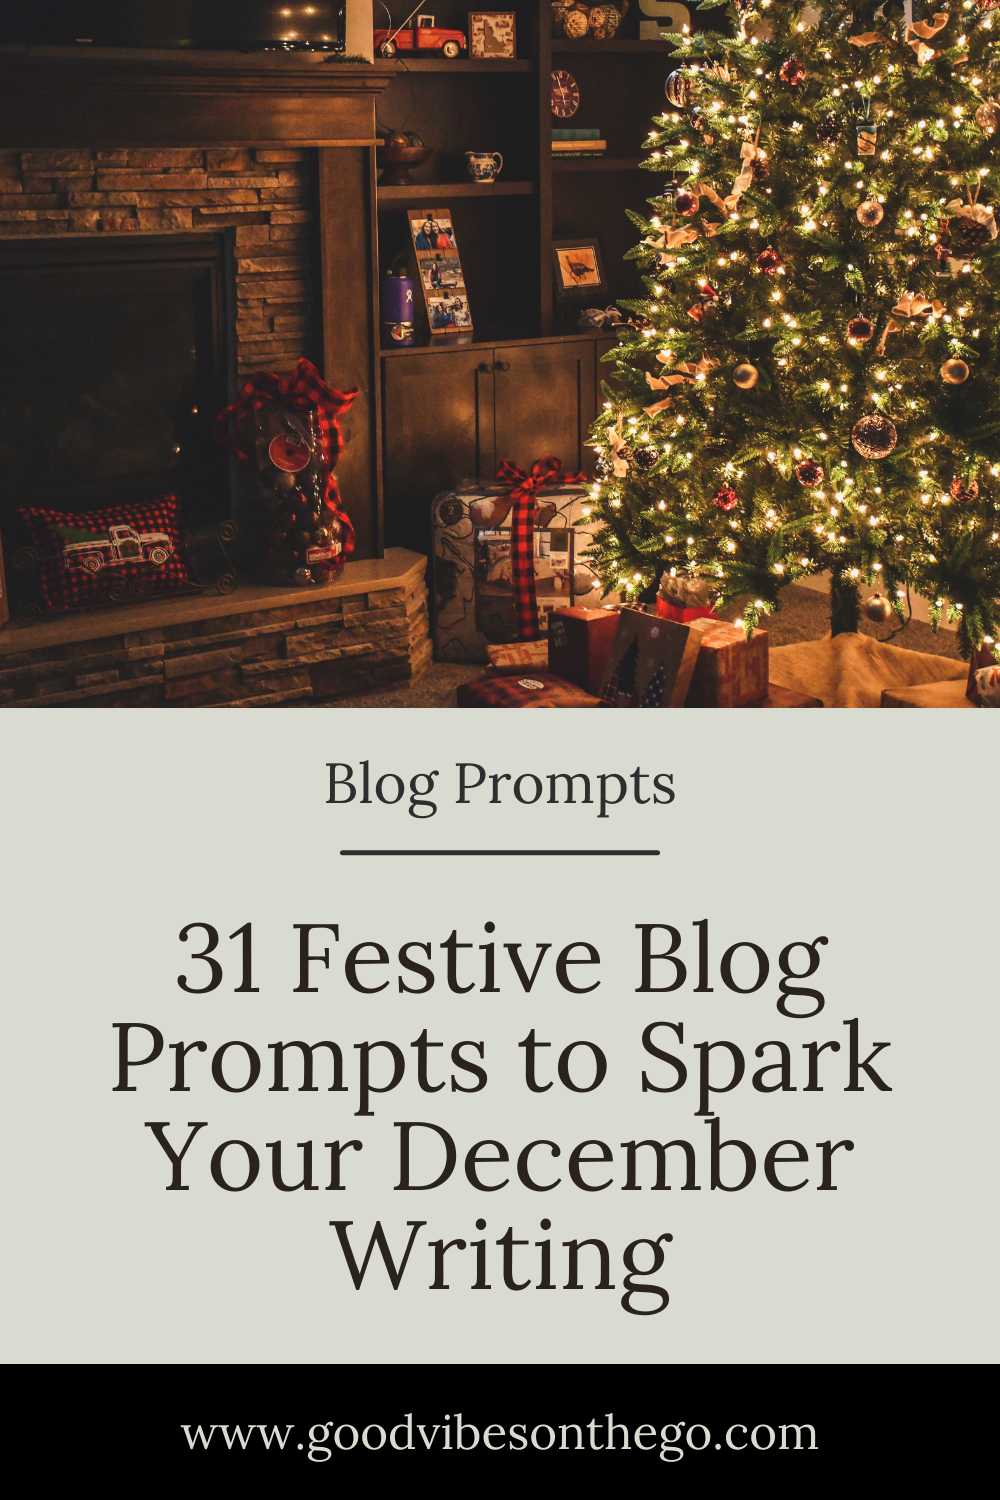 31 Festive Blog Prompts to Spark Your December Writing